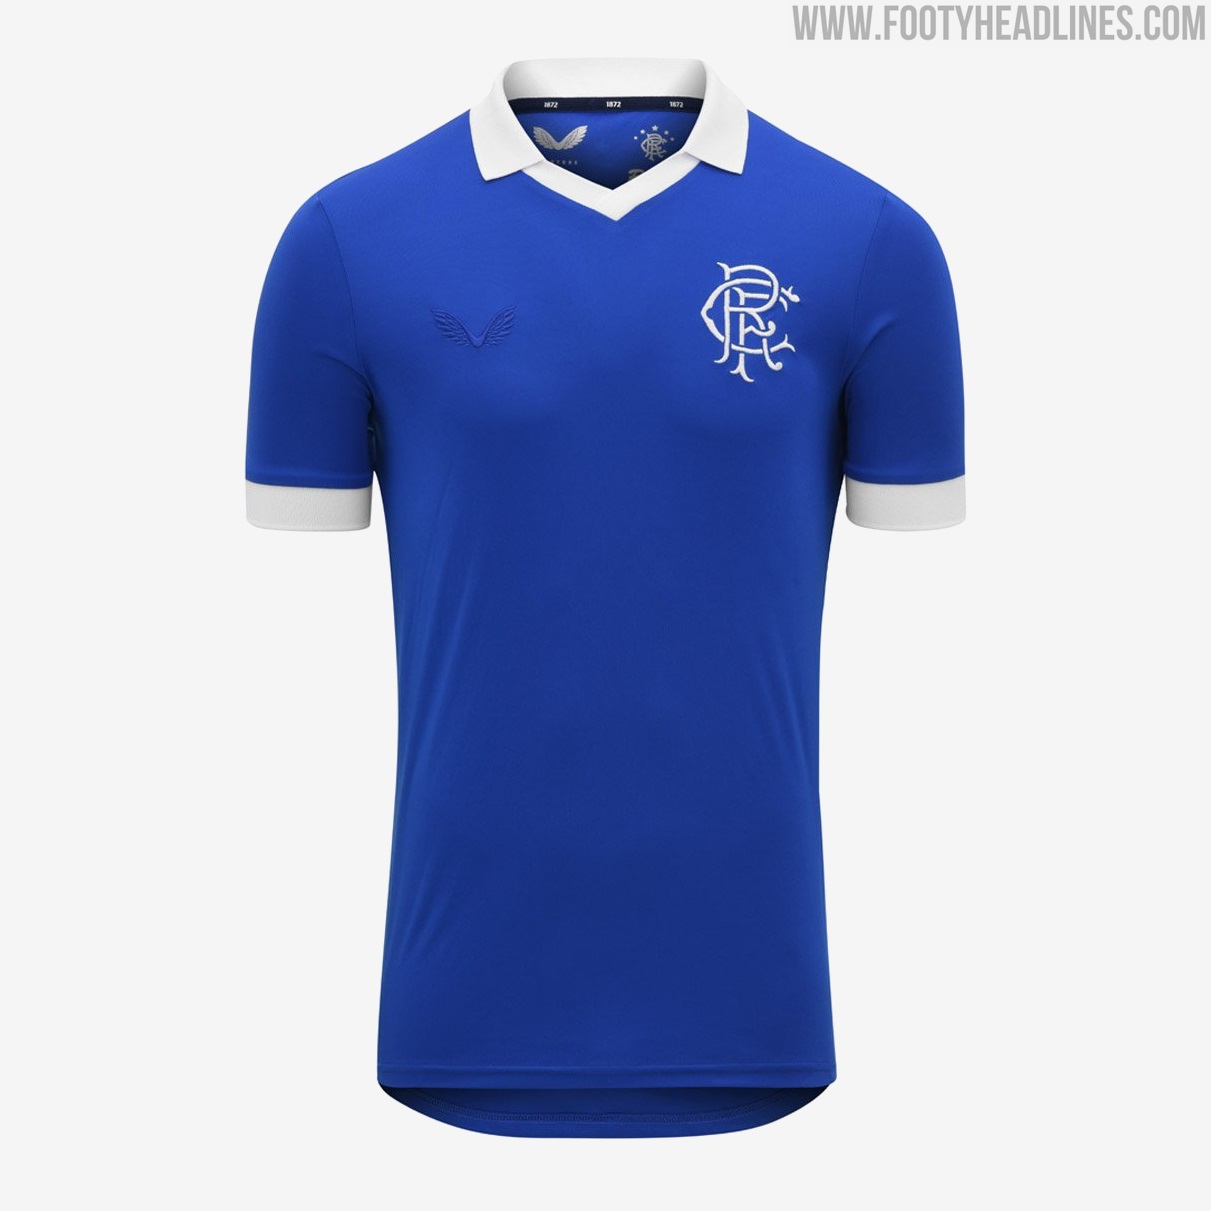 Introducing The Rangers Special Edition Retro Kits